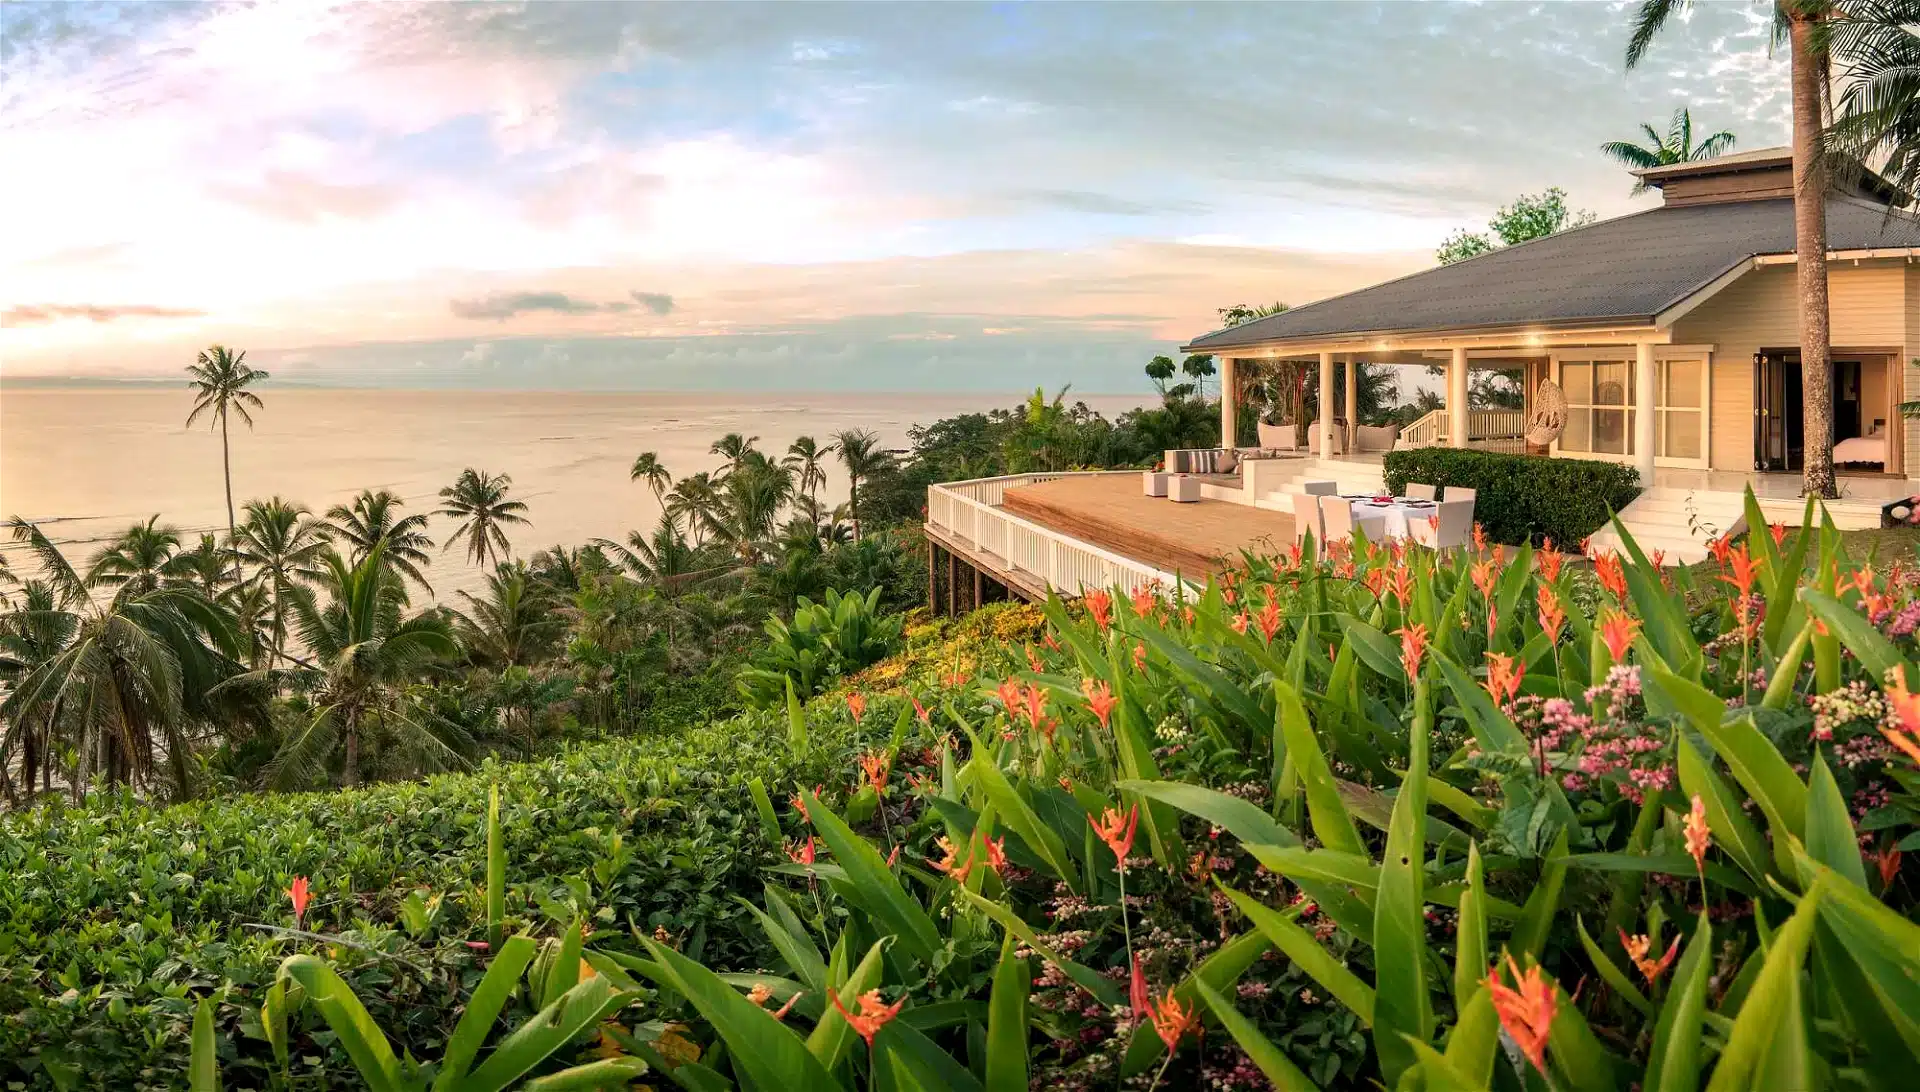 Luxury private resort, Fiji, fundraiser auction items, live auction items